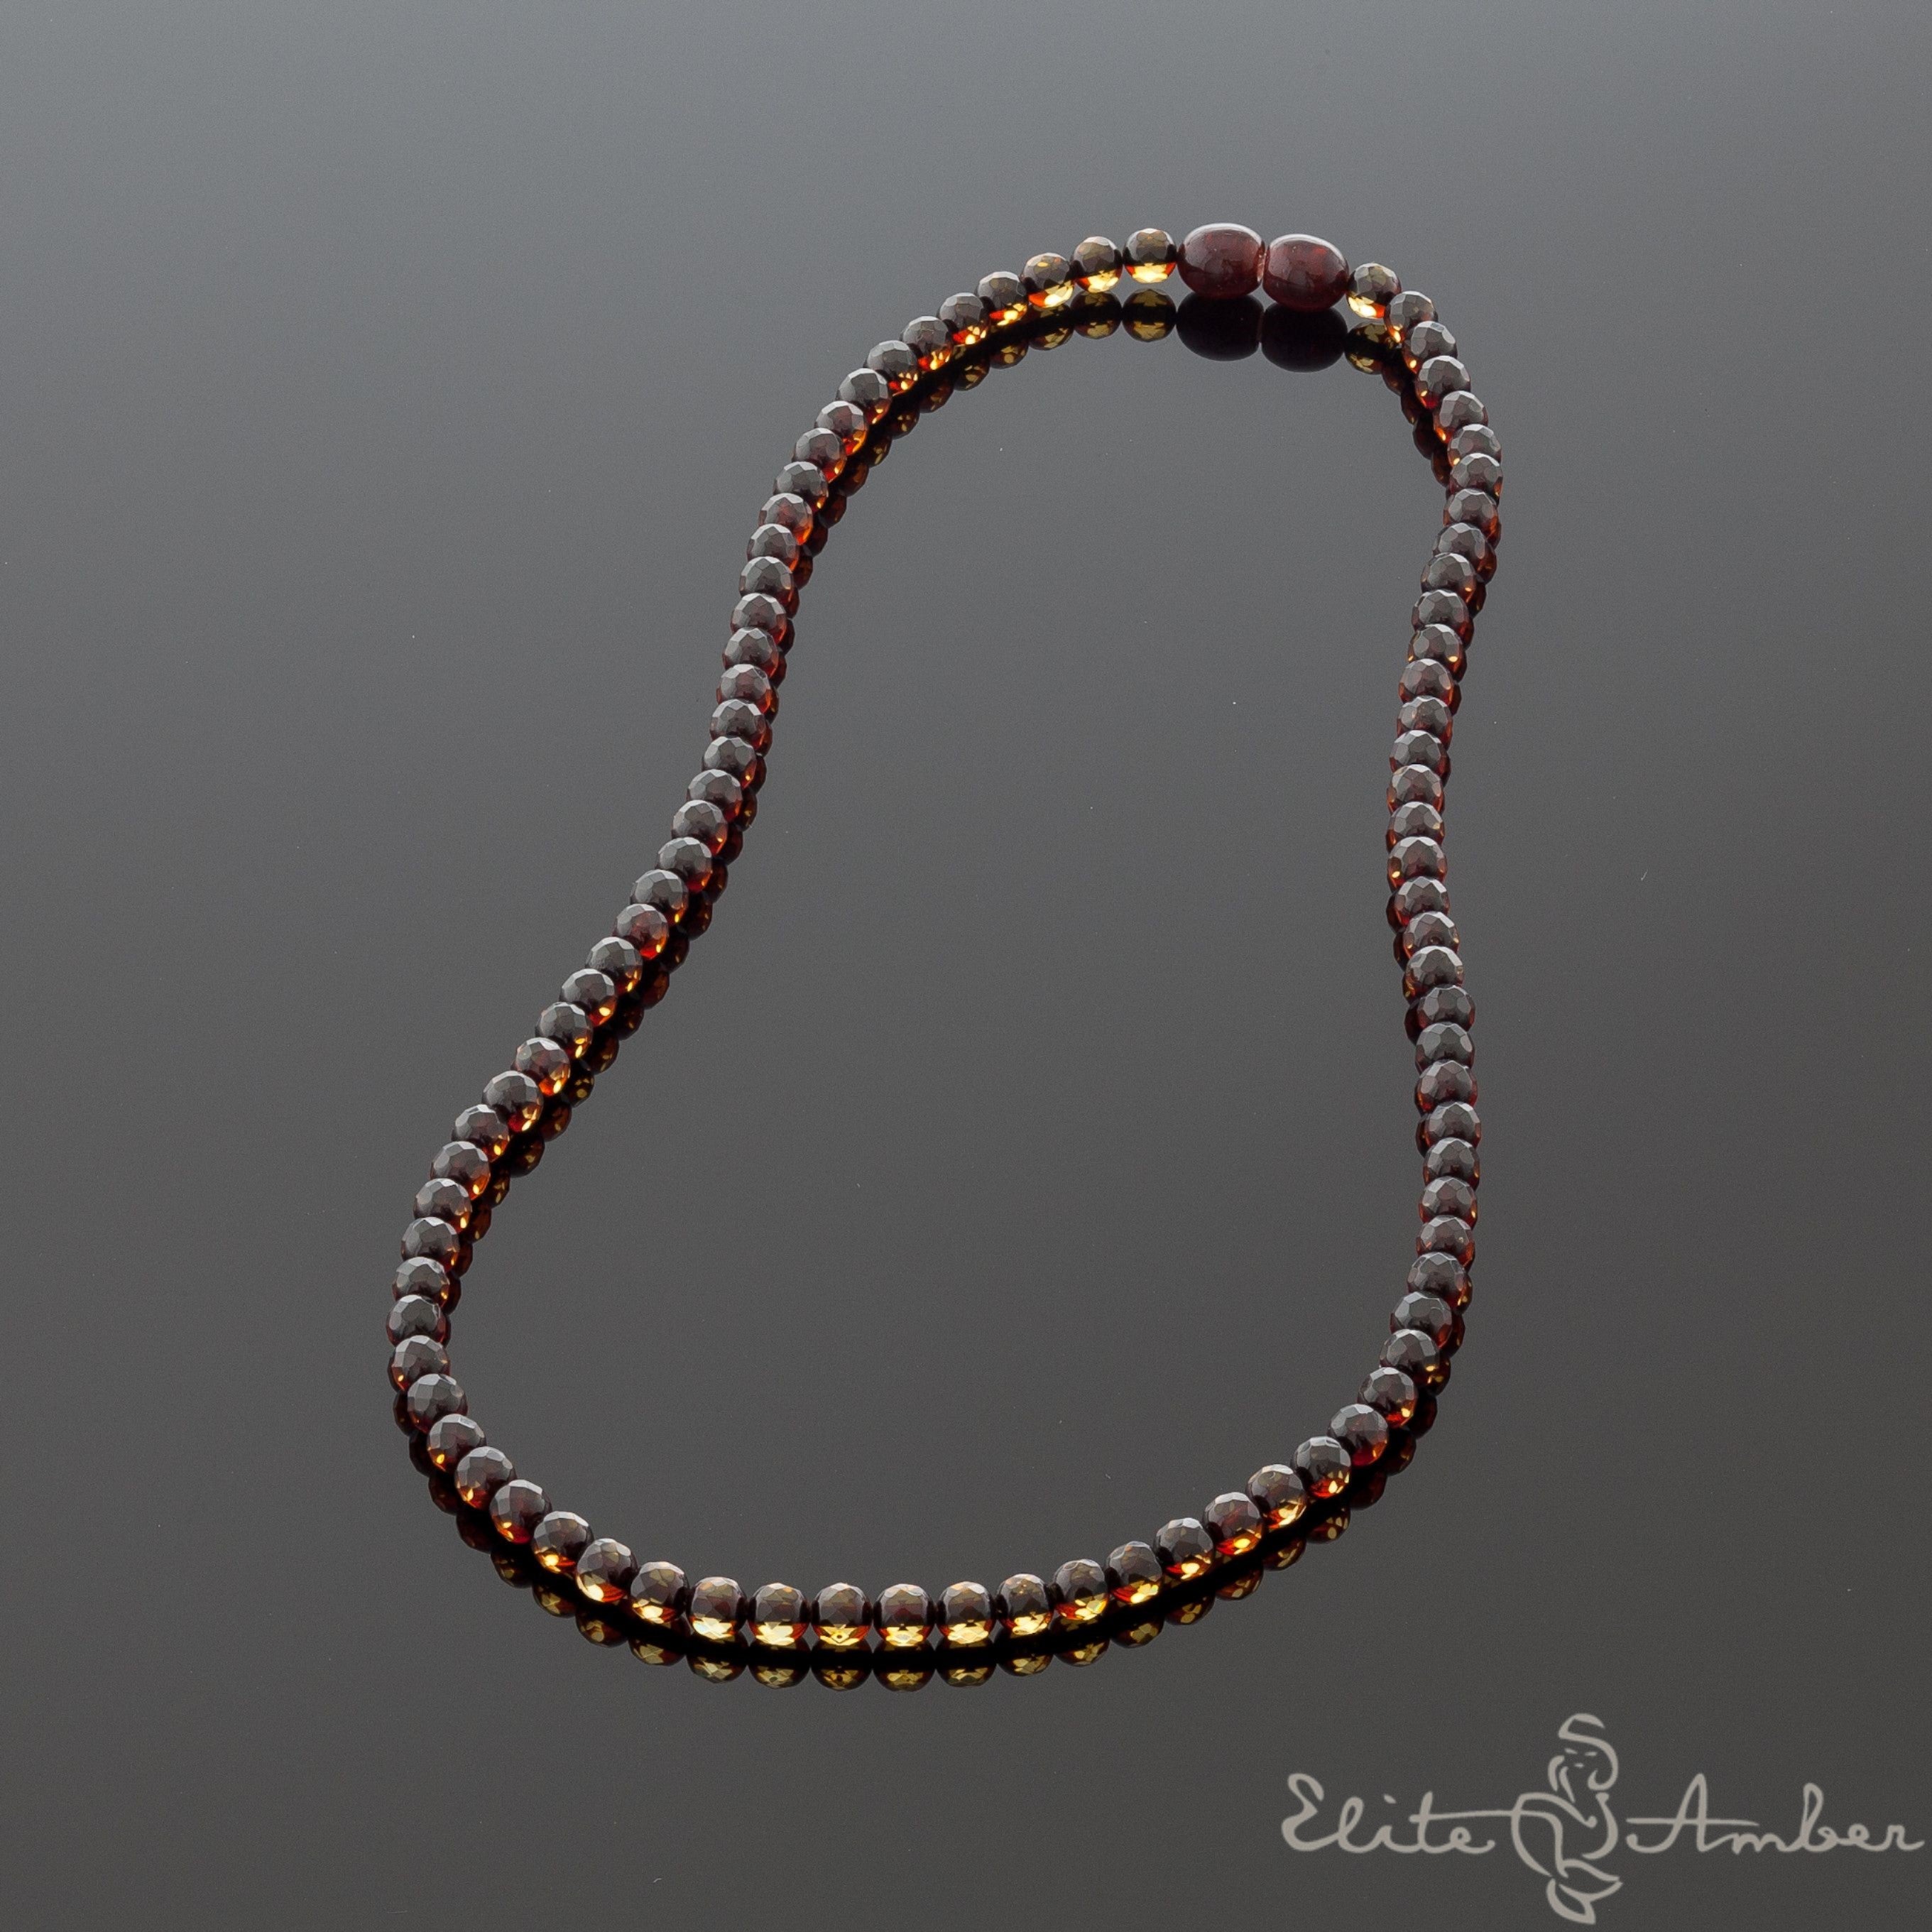 Amber necklace "Glossy night"